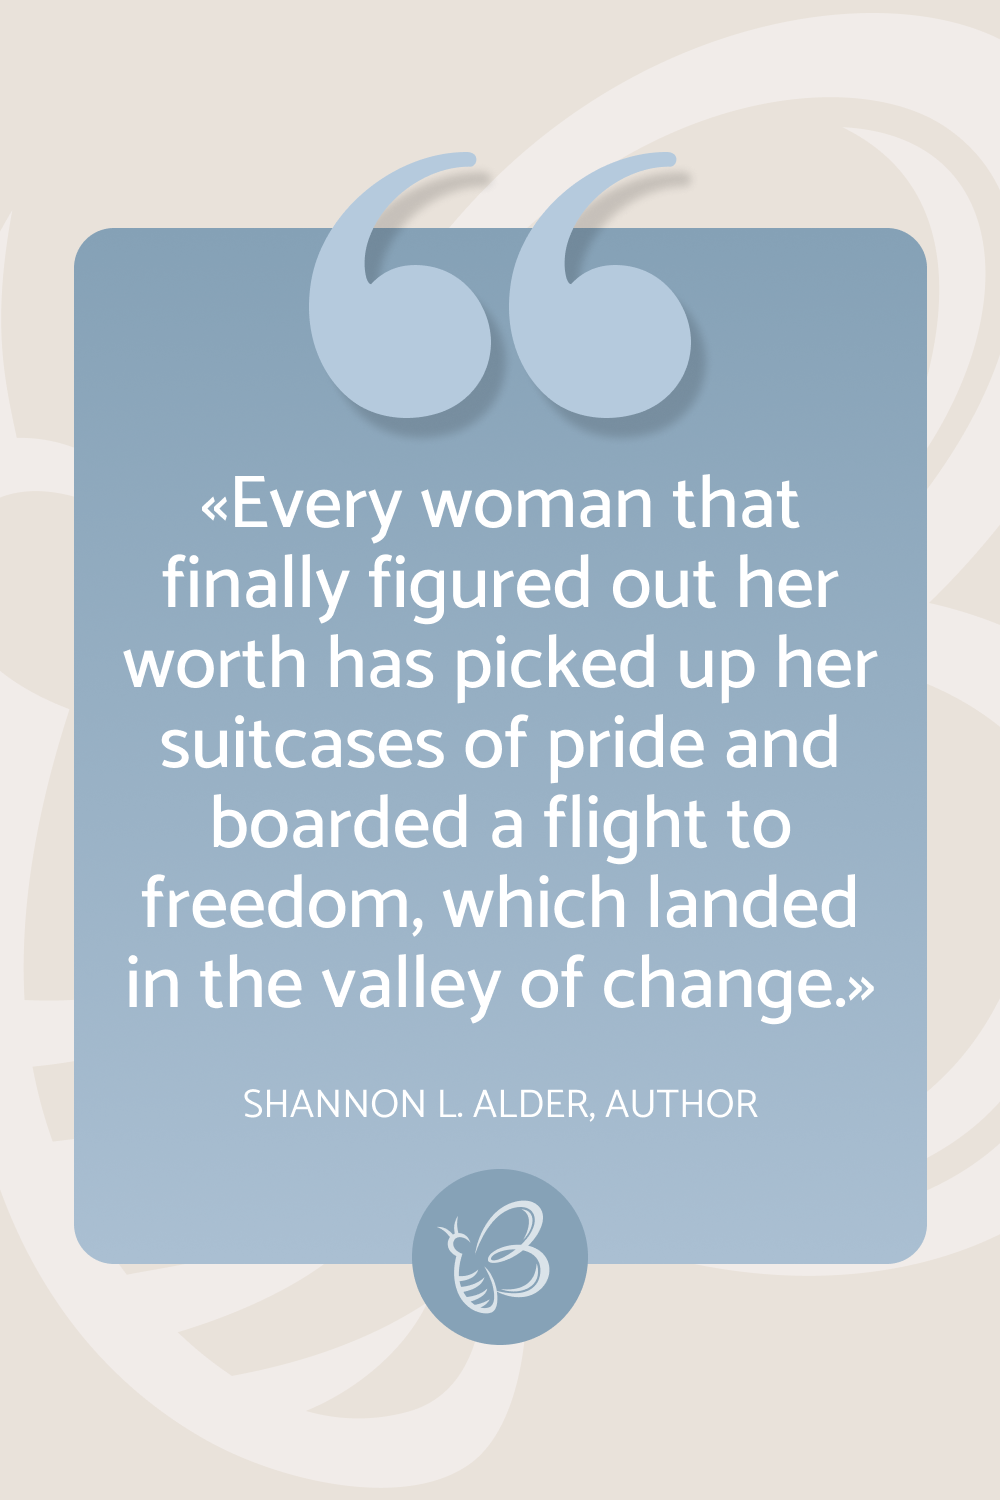 Every woman that finally figured out her worth has picked up her suitcases of pride and boarded a flight to freedom, which landed in the valley of change – Shannon L. Alder, Author